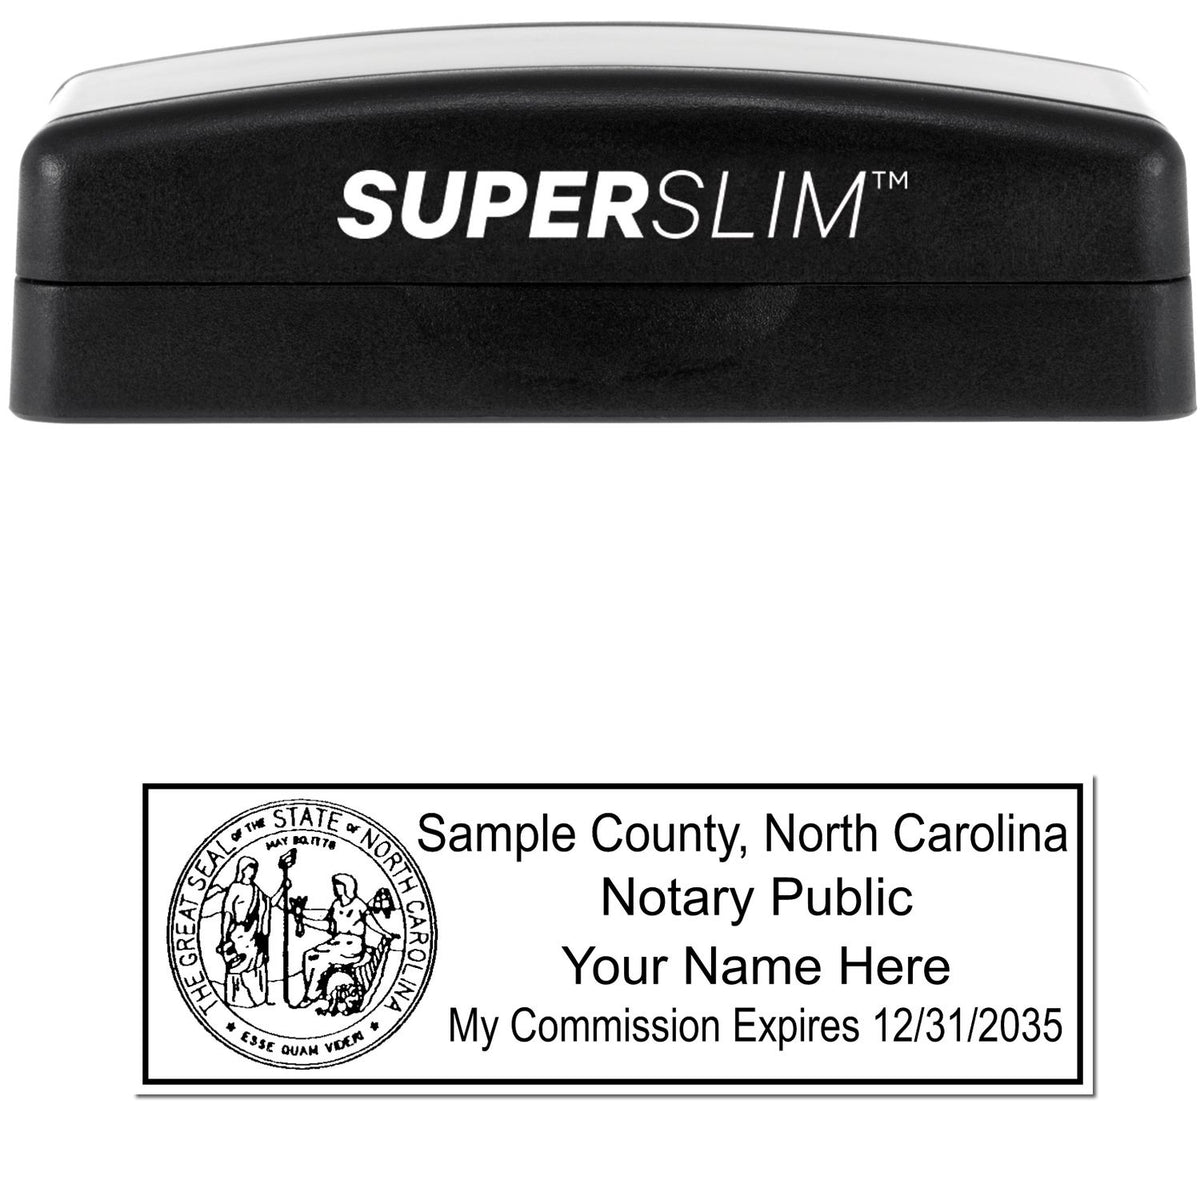 The main image for the Super Slim North Carolina Notary Public Stamp depicting a sample of the imprint and electronic files